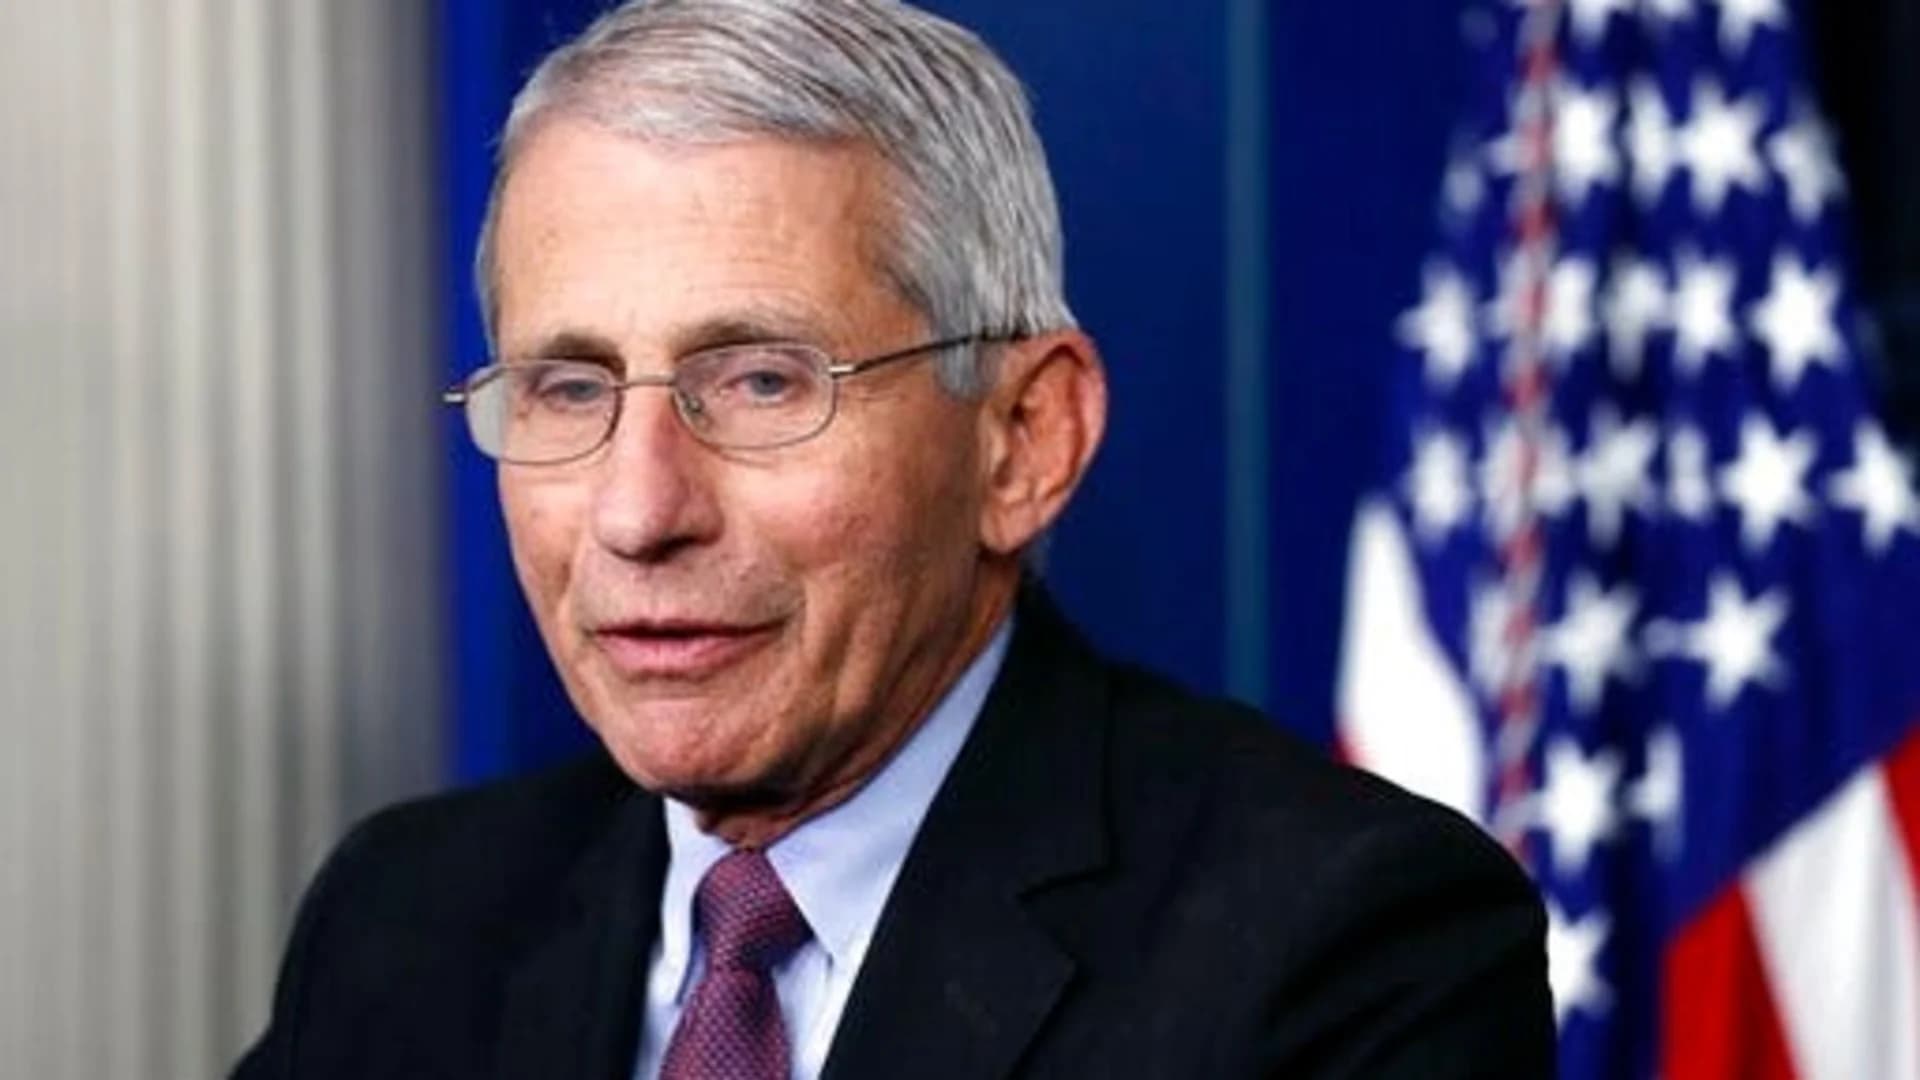 Dr. Anthony Fauci testifies on COVID-19 response - LIVE VIDEO